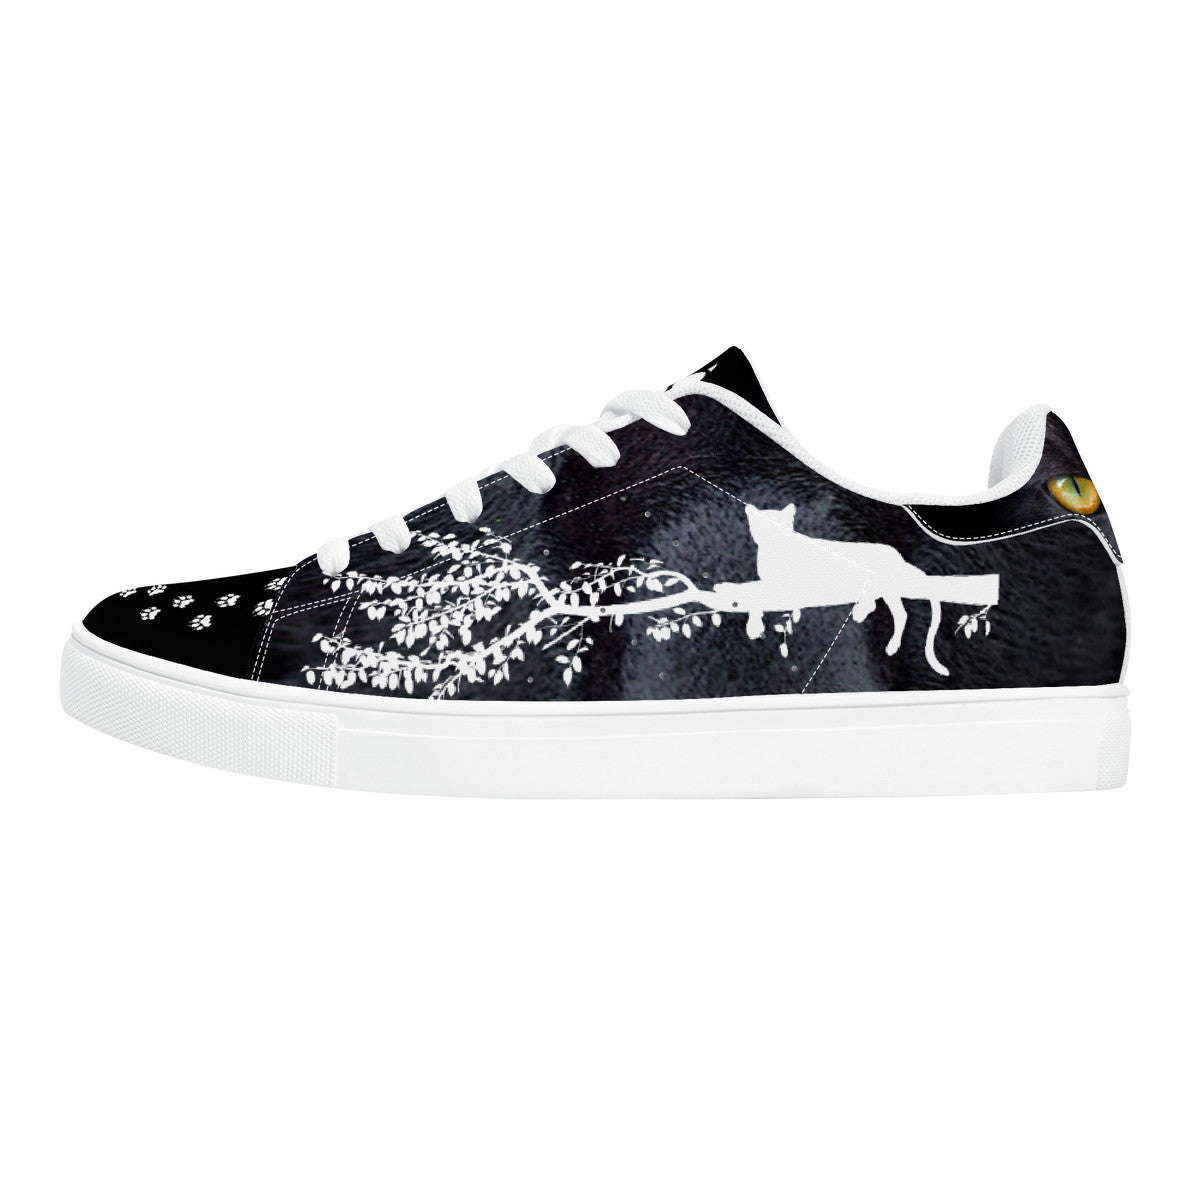 Black Panther Limited Edition- White | Low Top Customized | Shoe Zero